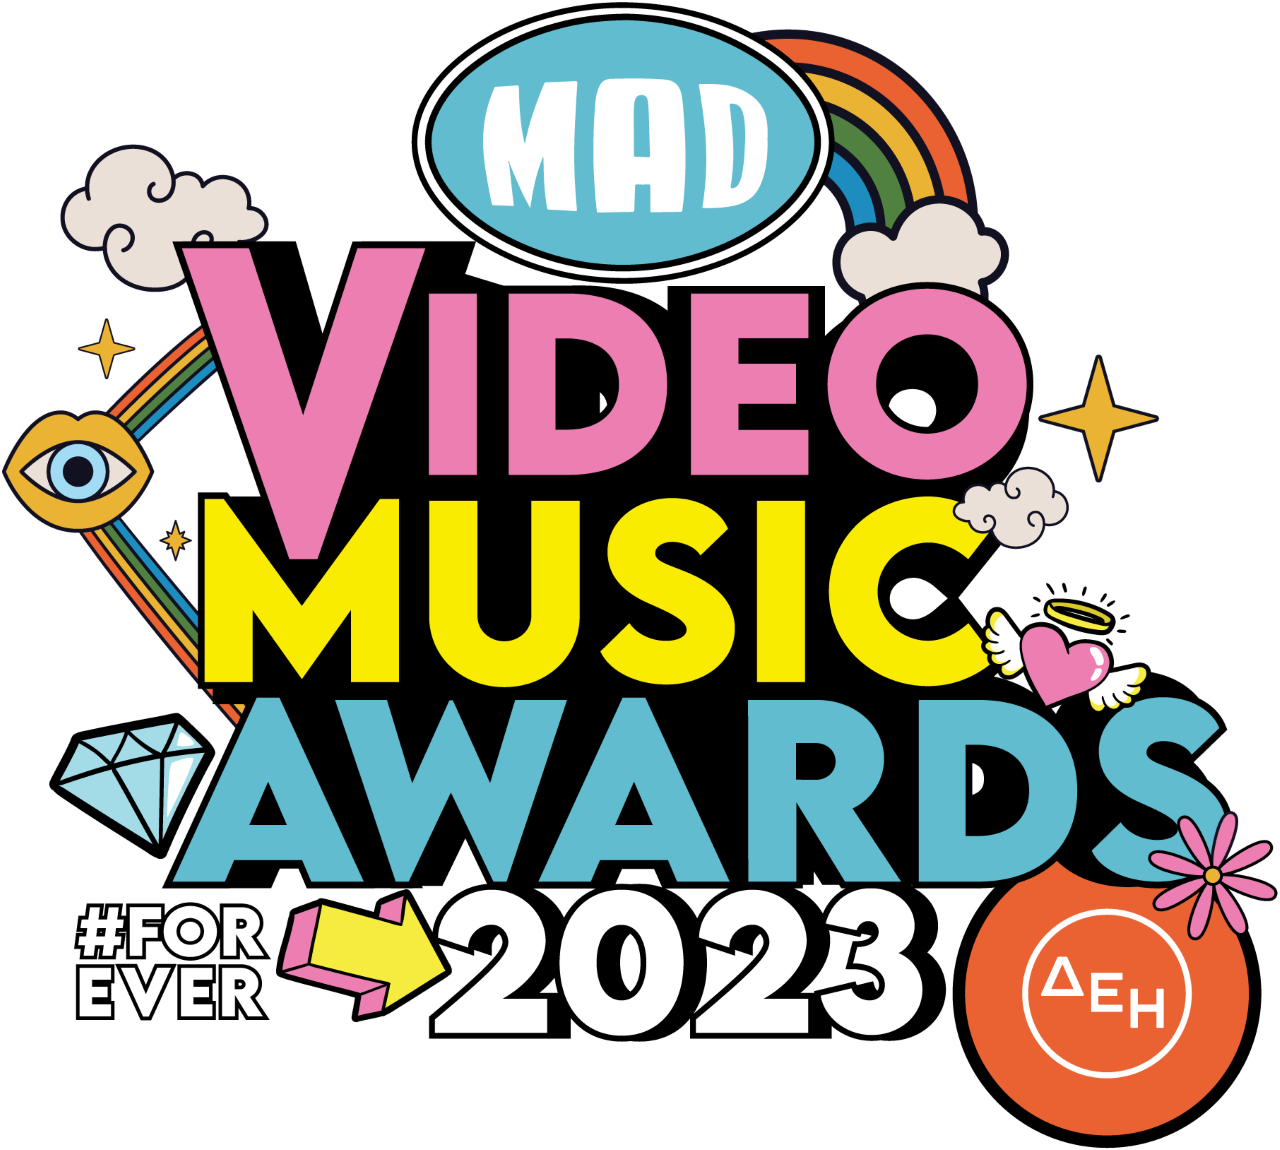 MAD VMA 2023 από τη ΔΕΗ FOREVER